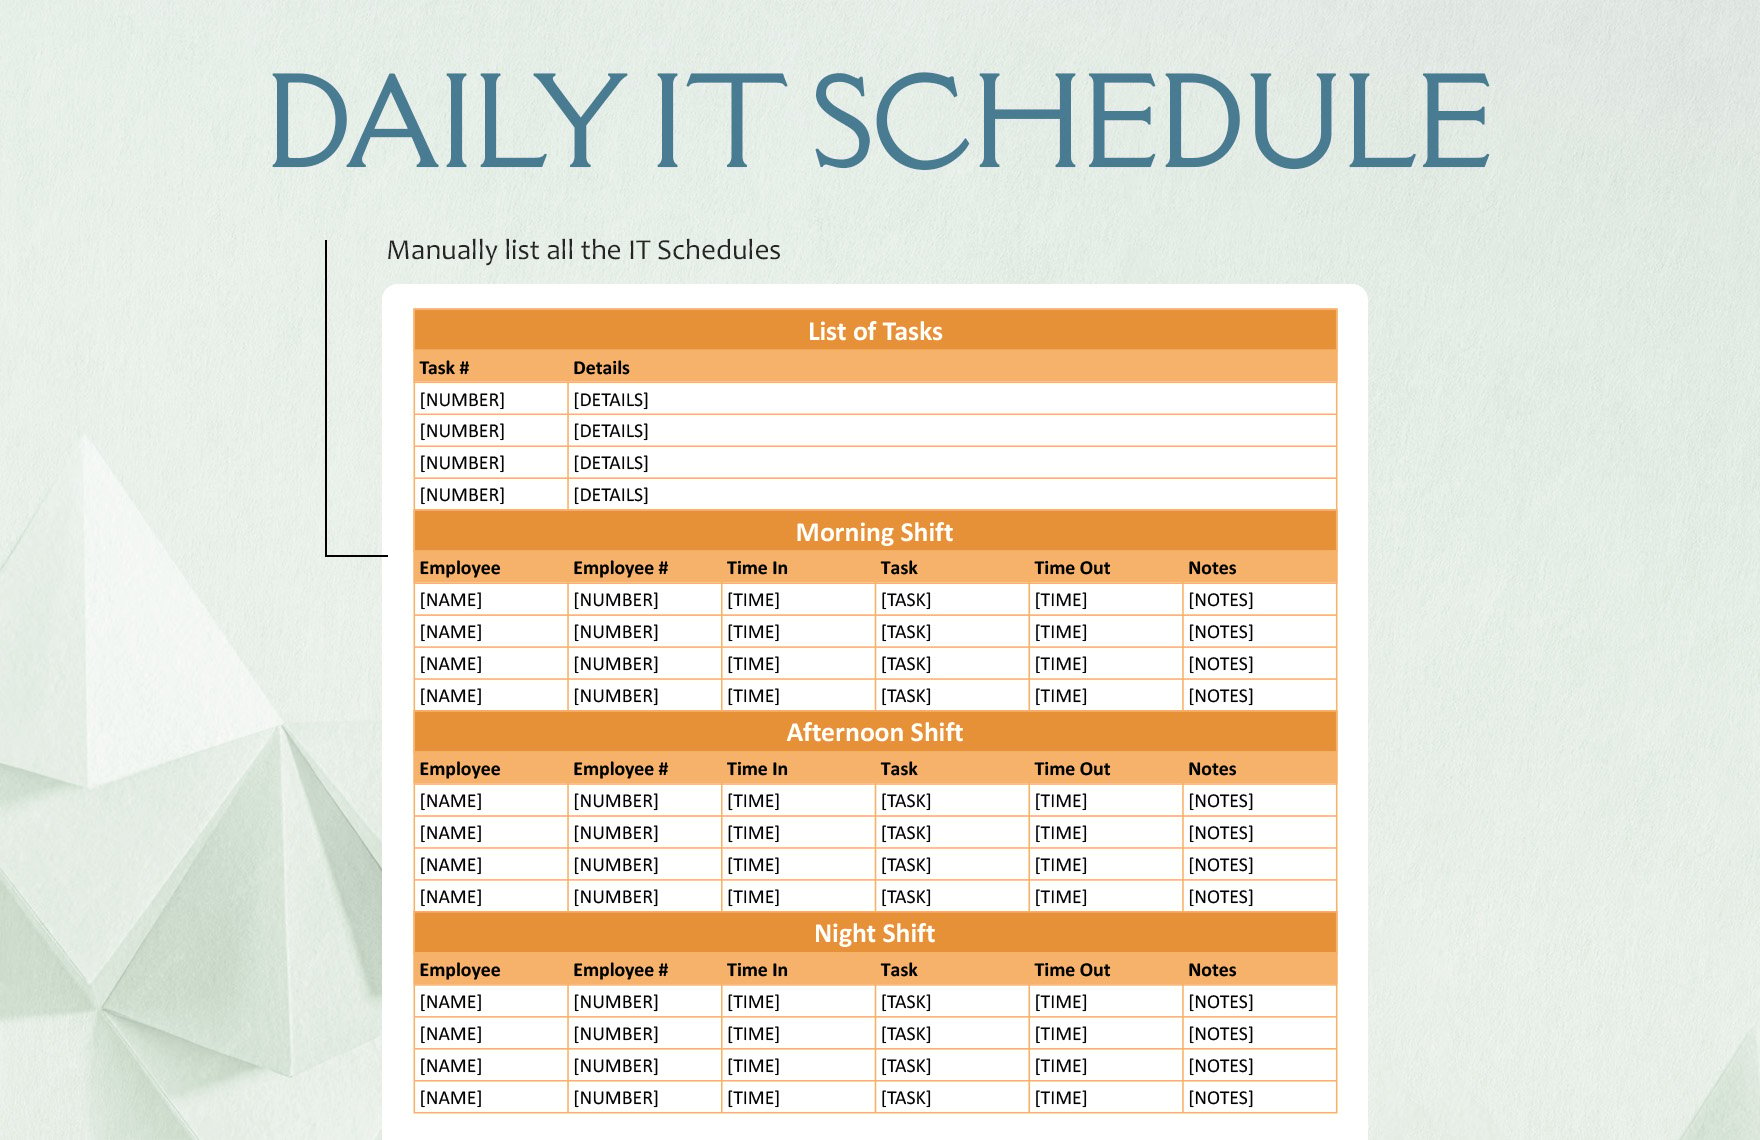 Blank Daily IT Schedule Template